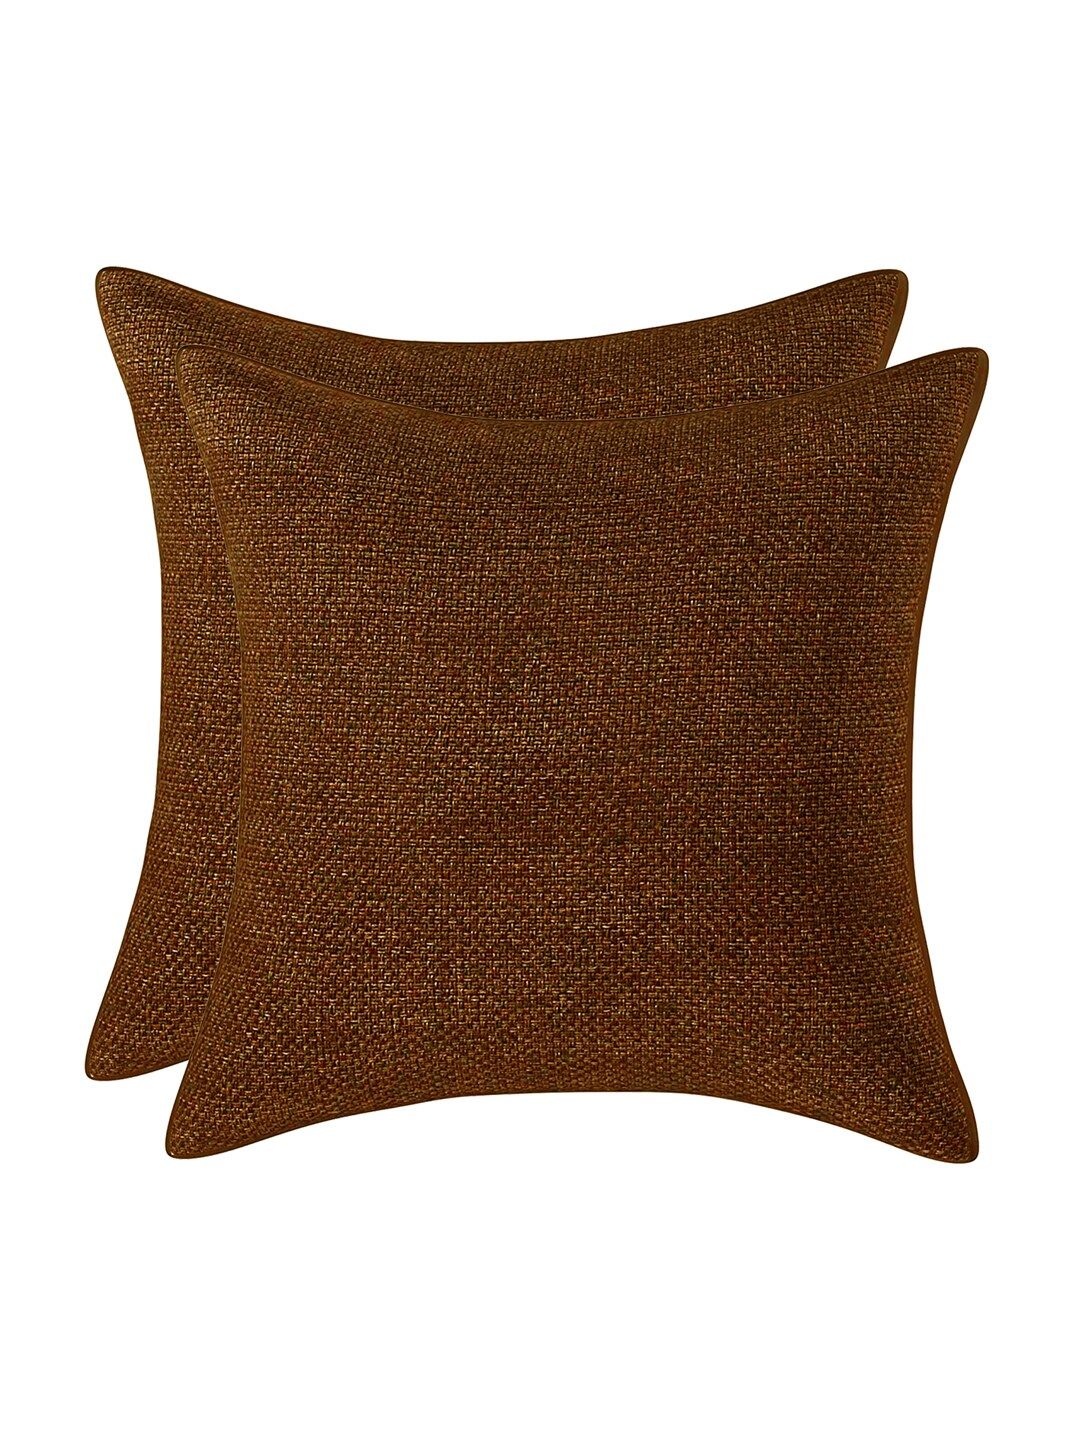 Kuber Industries Set of 2 Brown Square Cushion Covers Price in India